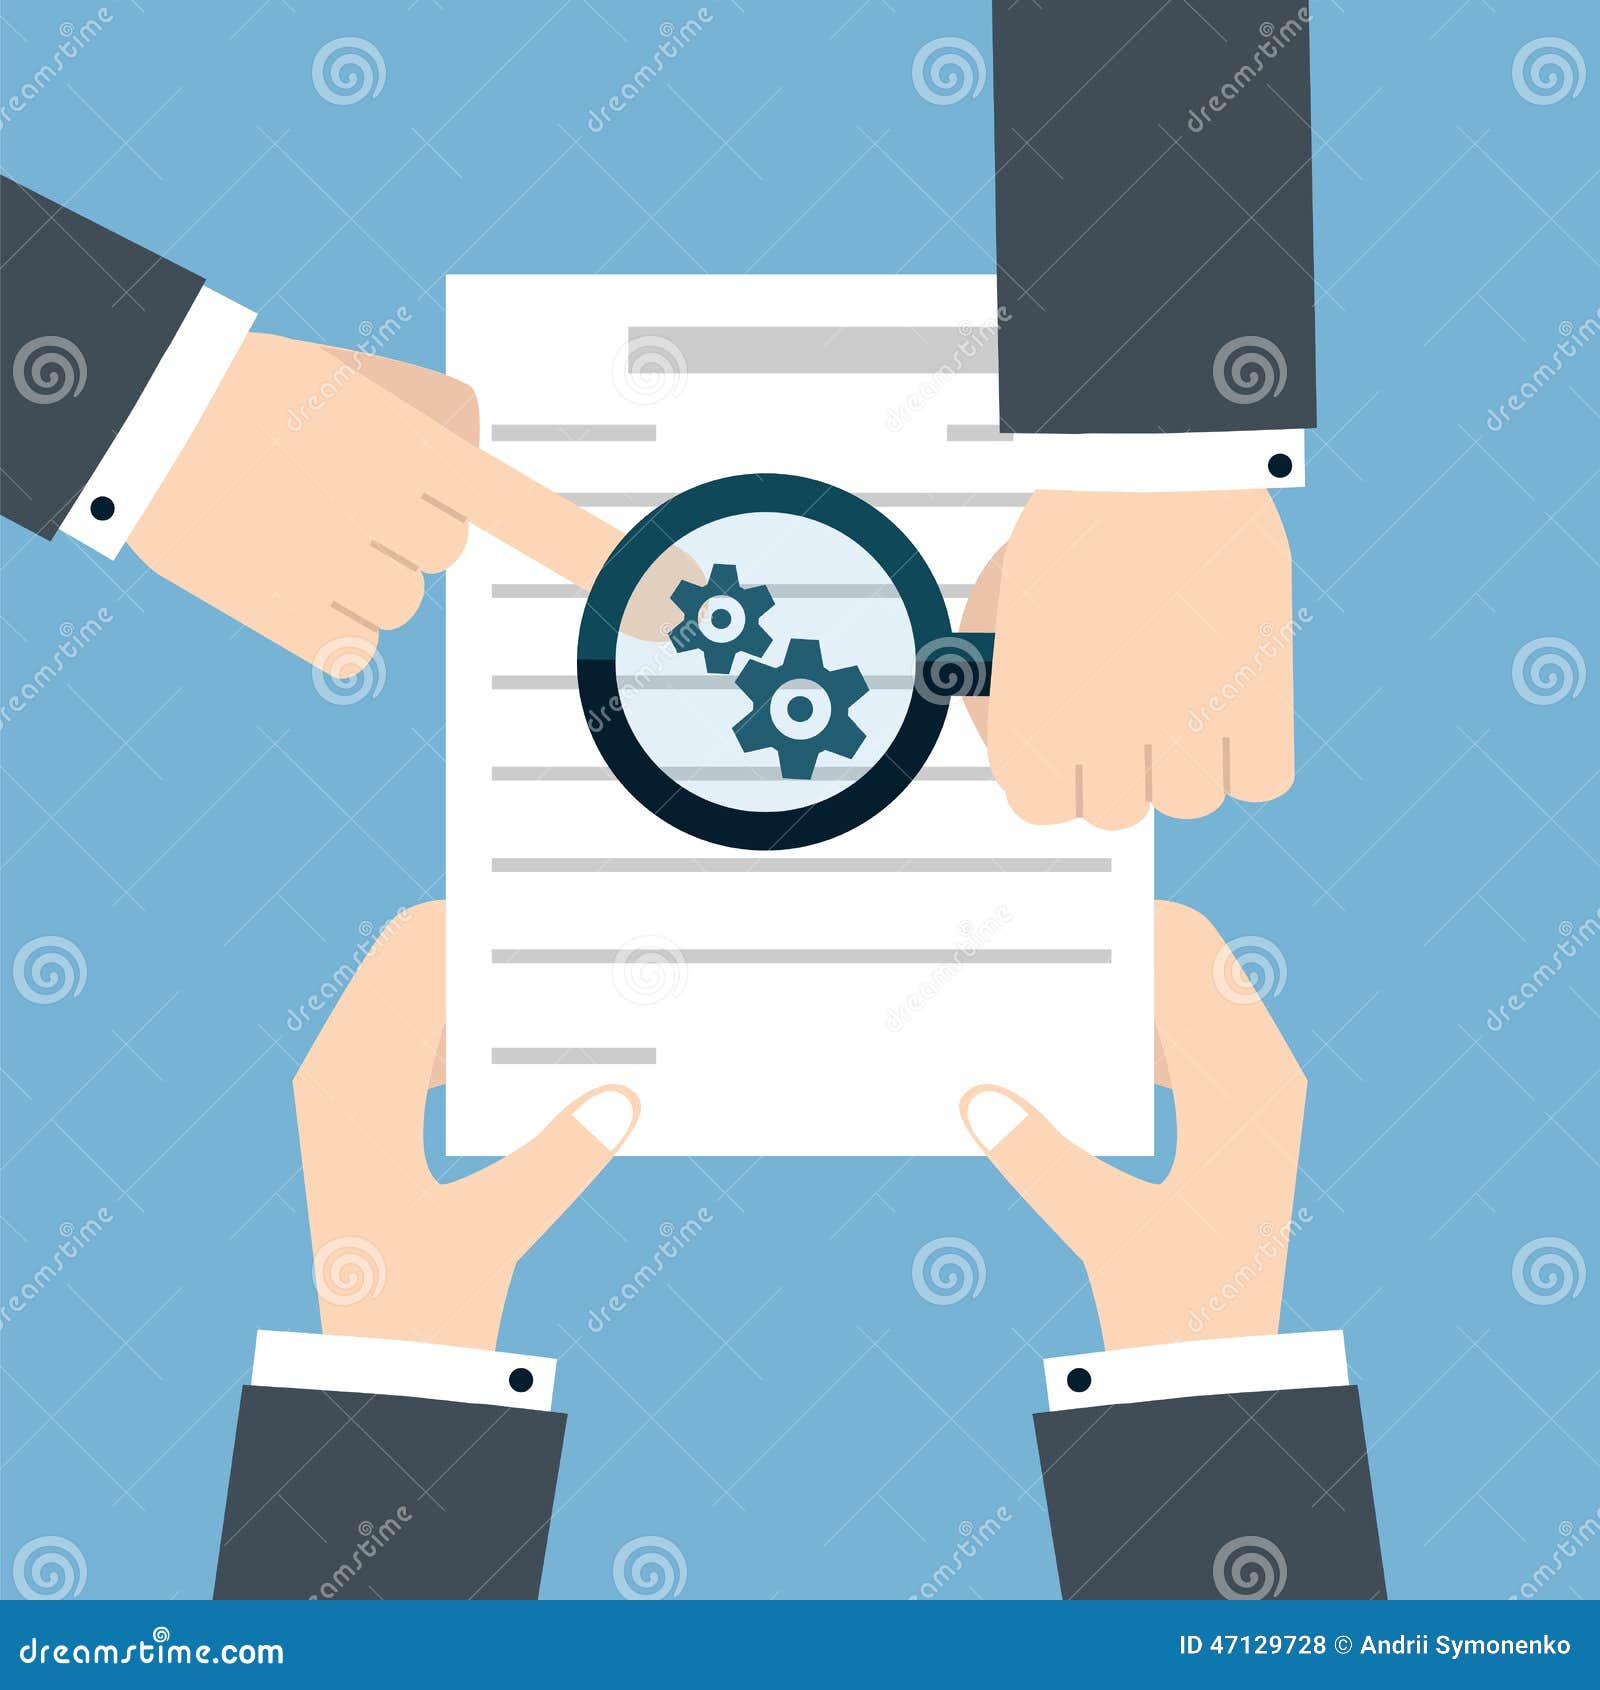 preparation business contract icon.